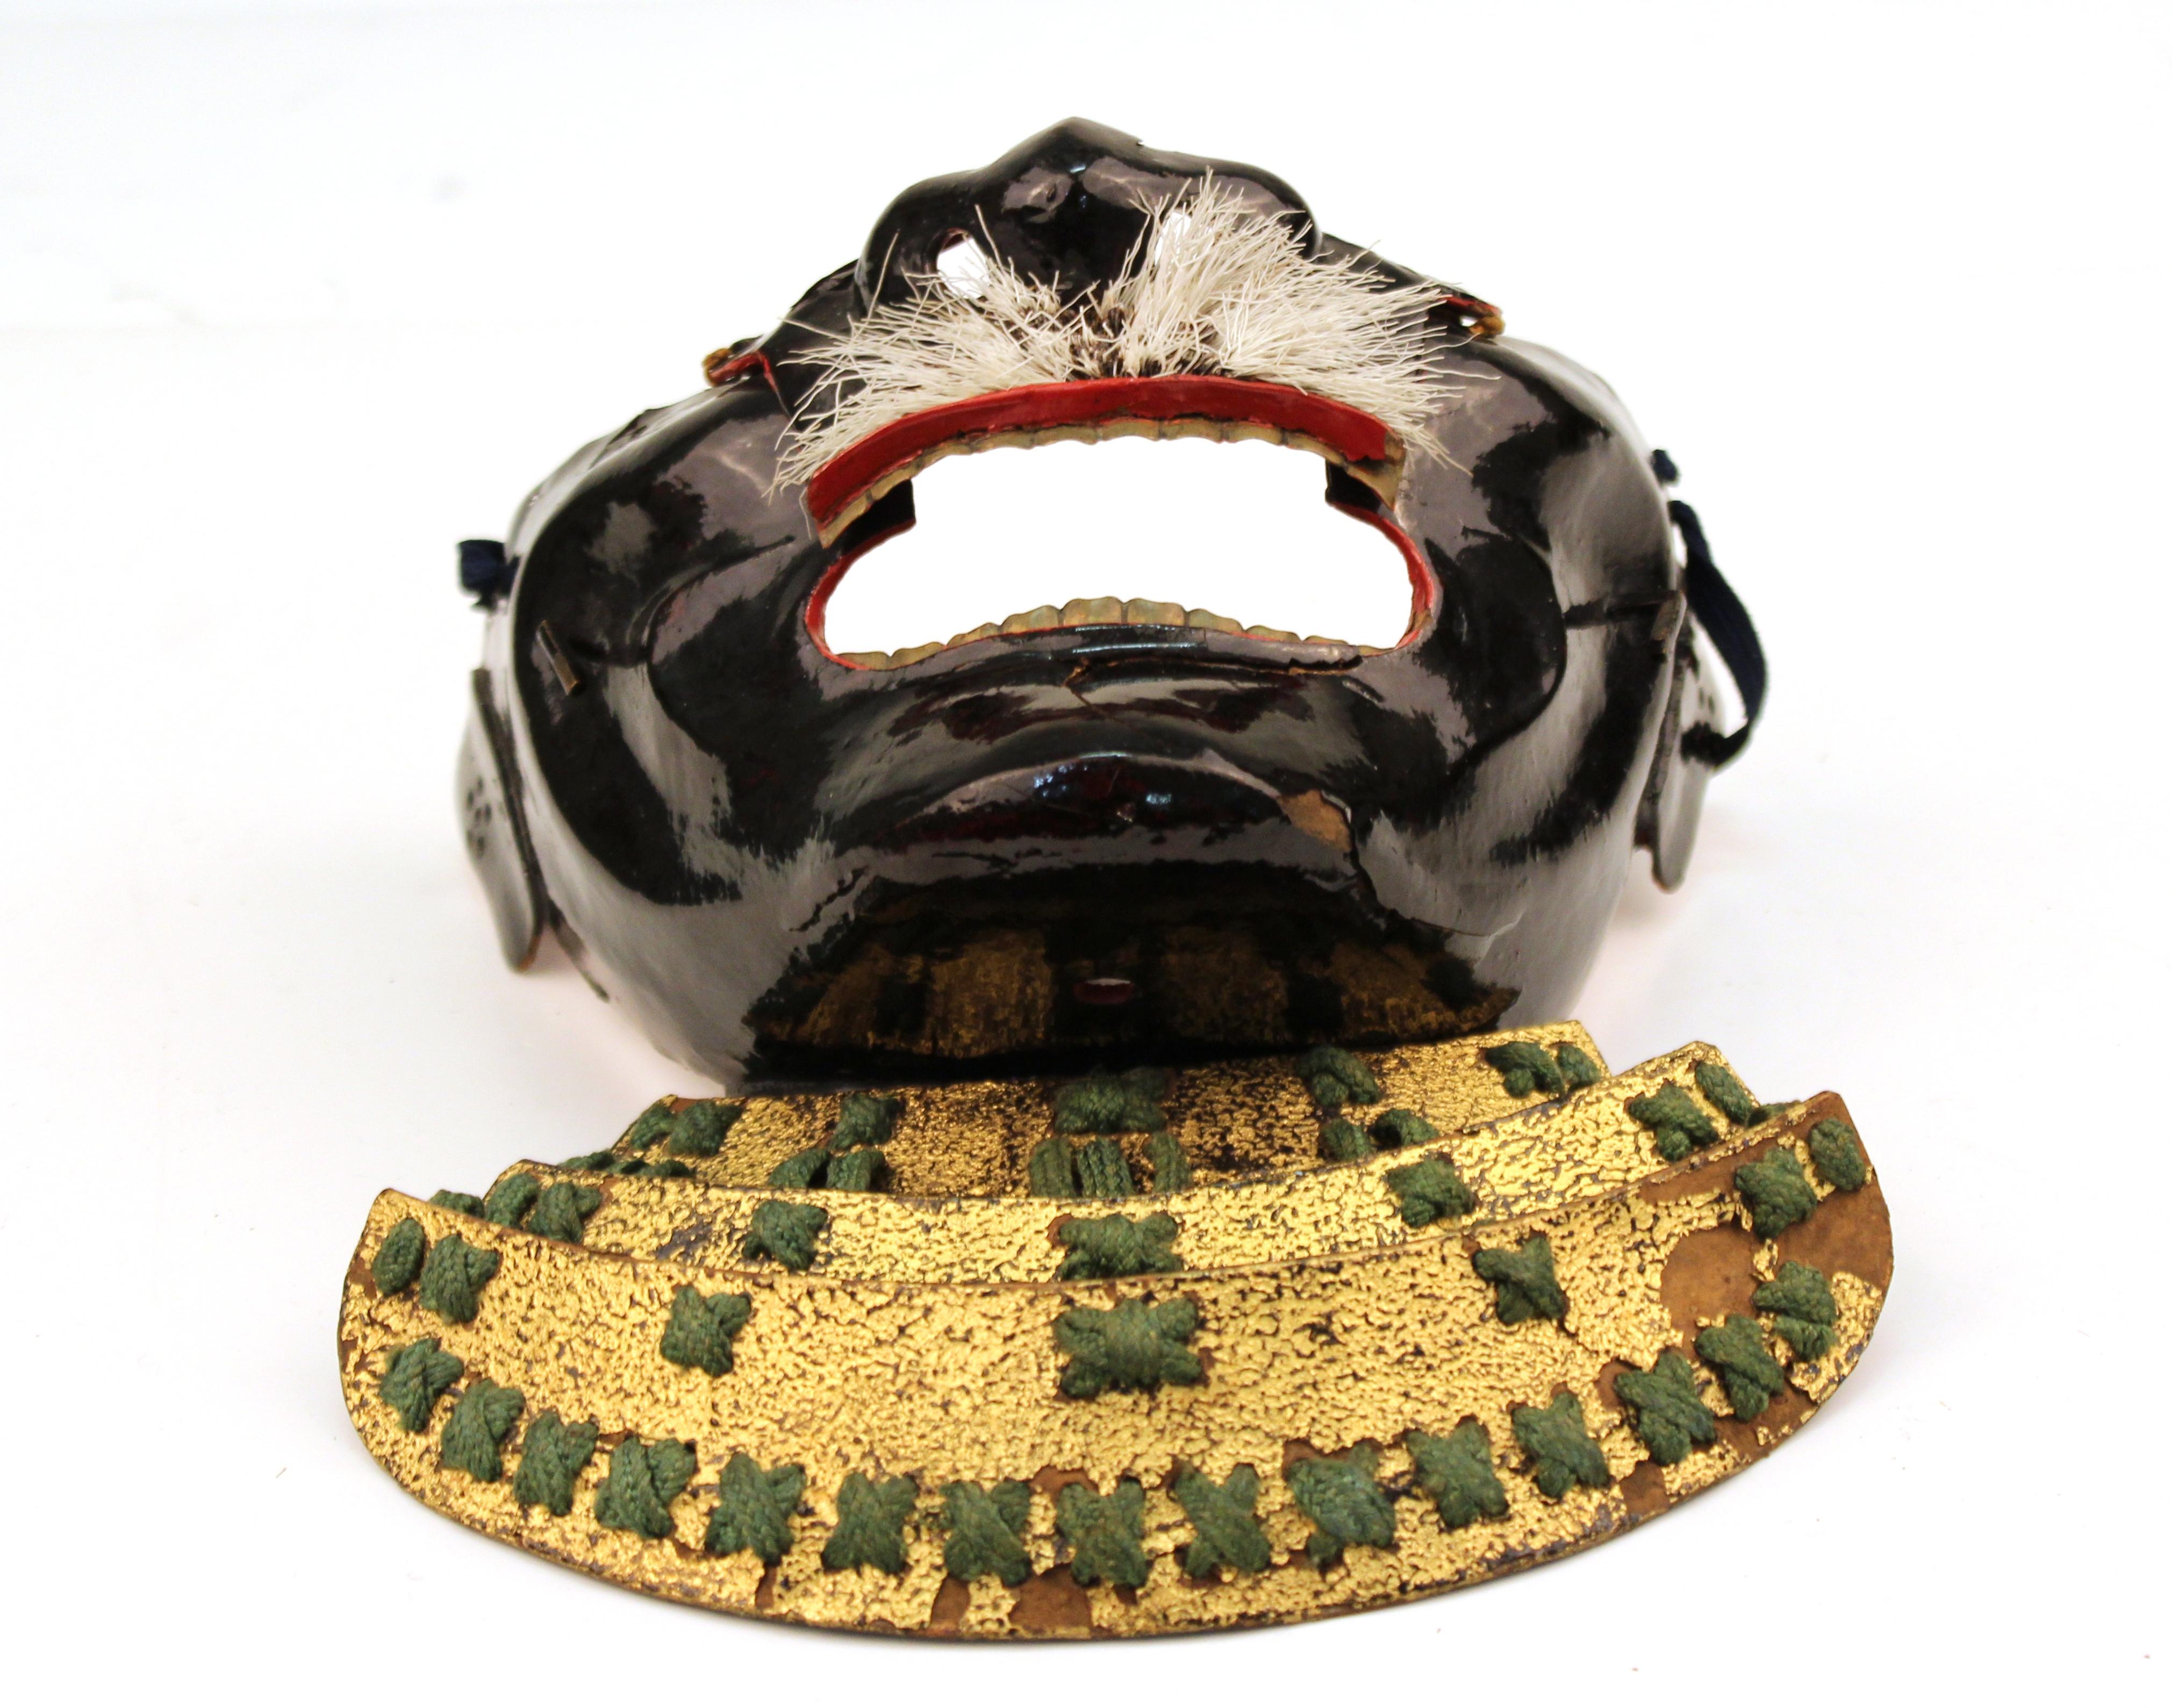 Japanese Edo period samurai half-face mask with mustache. In good vintage condition with age-appropriate wear and patina.